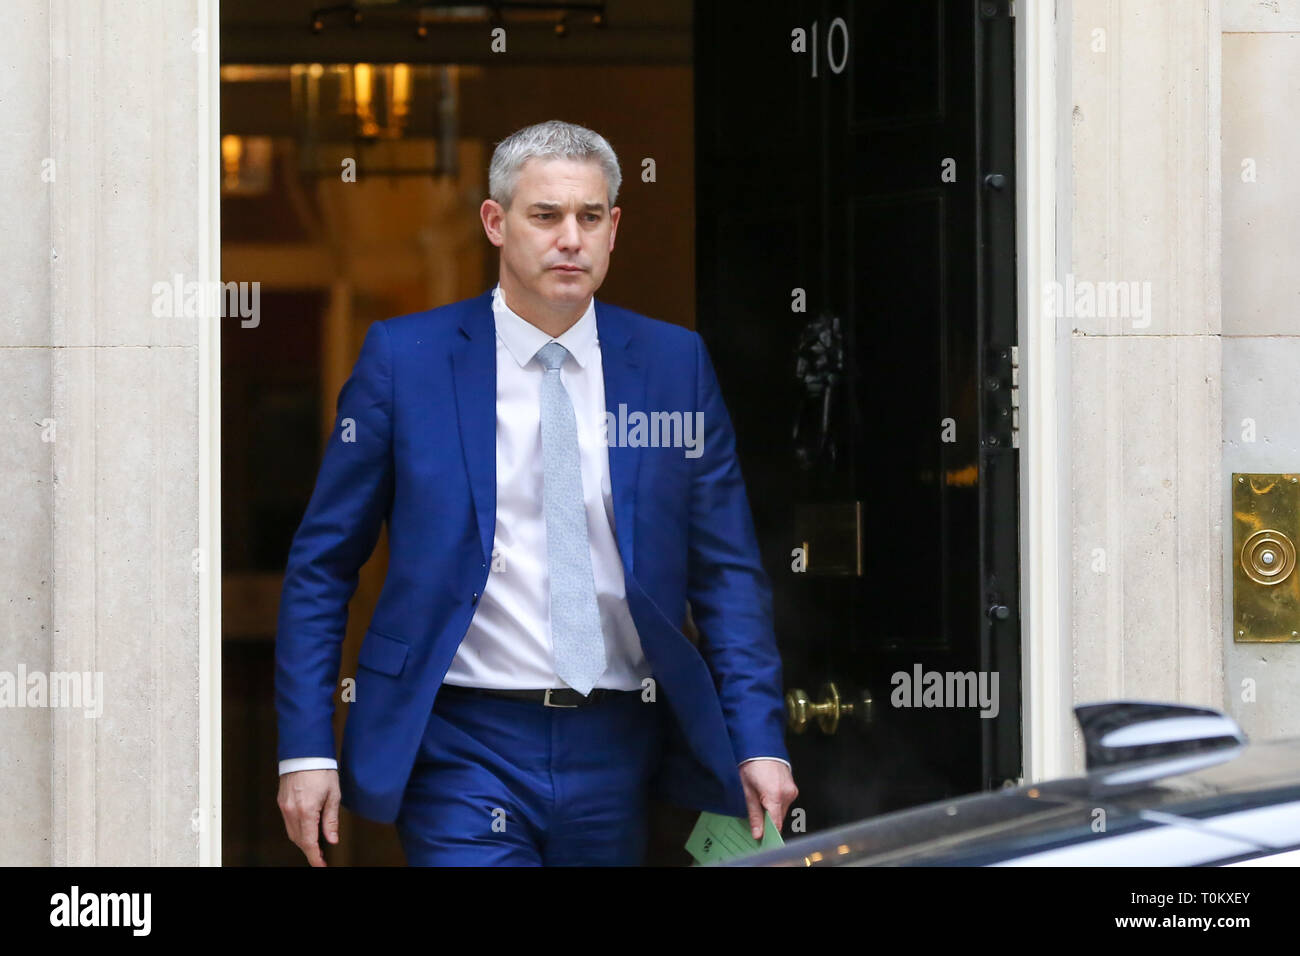 Stephen Barclay - Brexit Secretary is seen leaving from No 10 Downing Street. Stock Photo